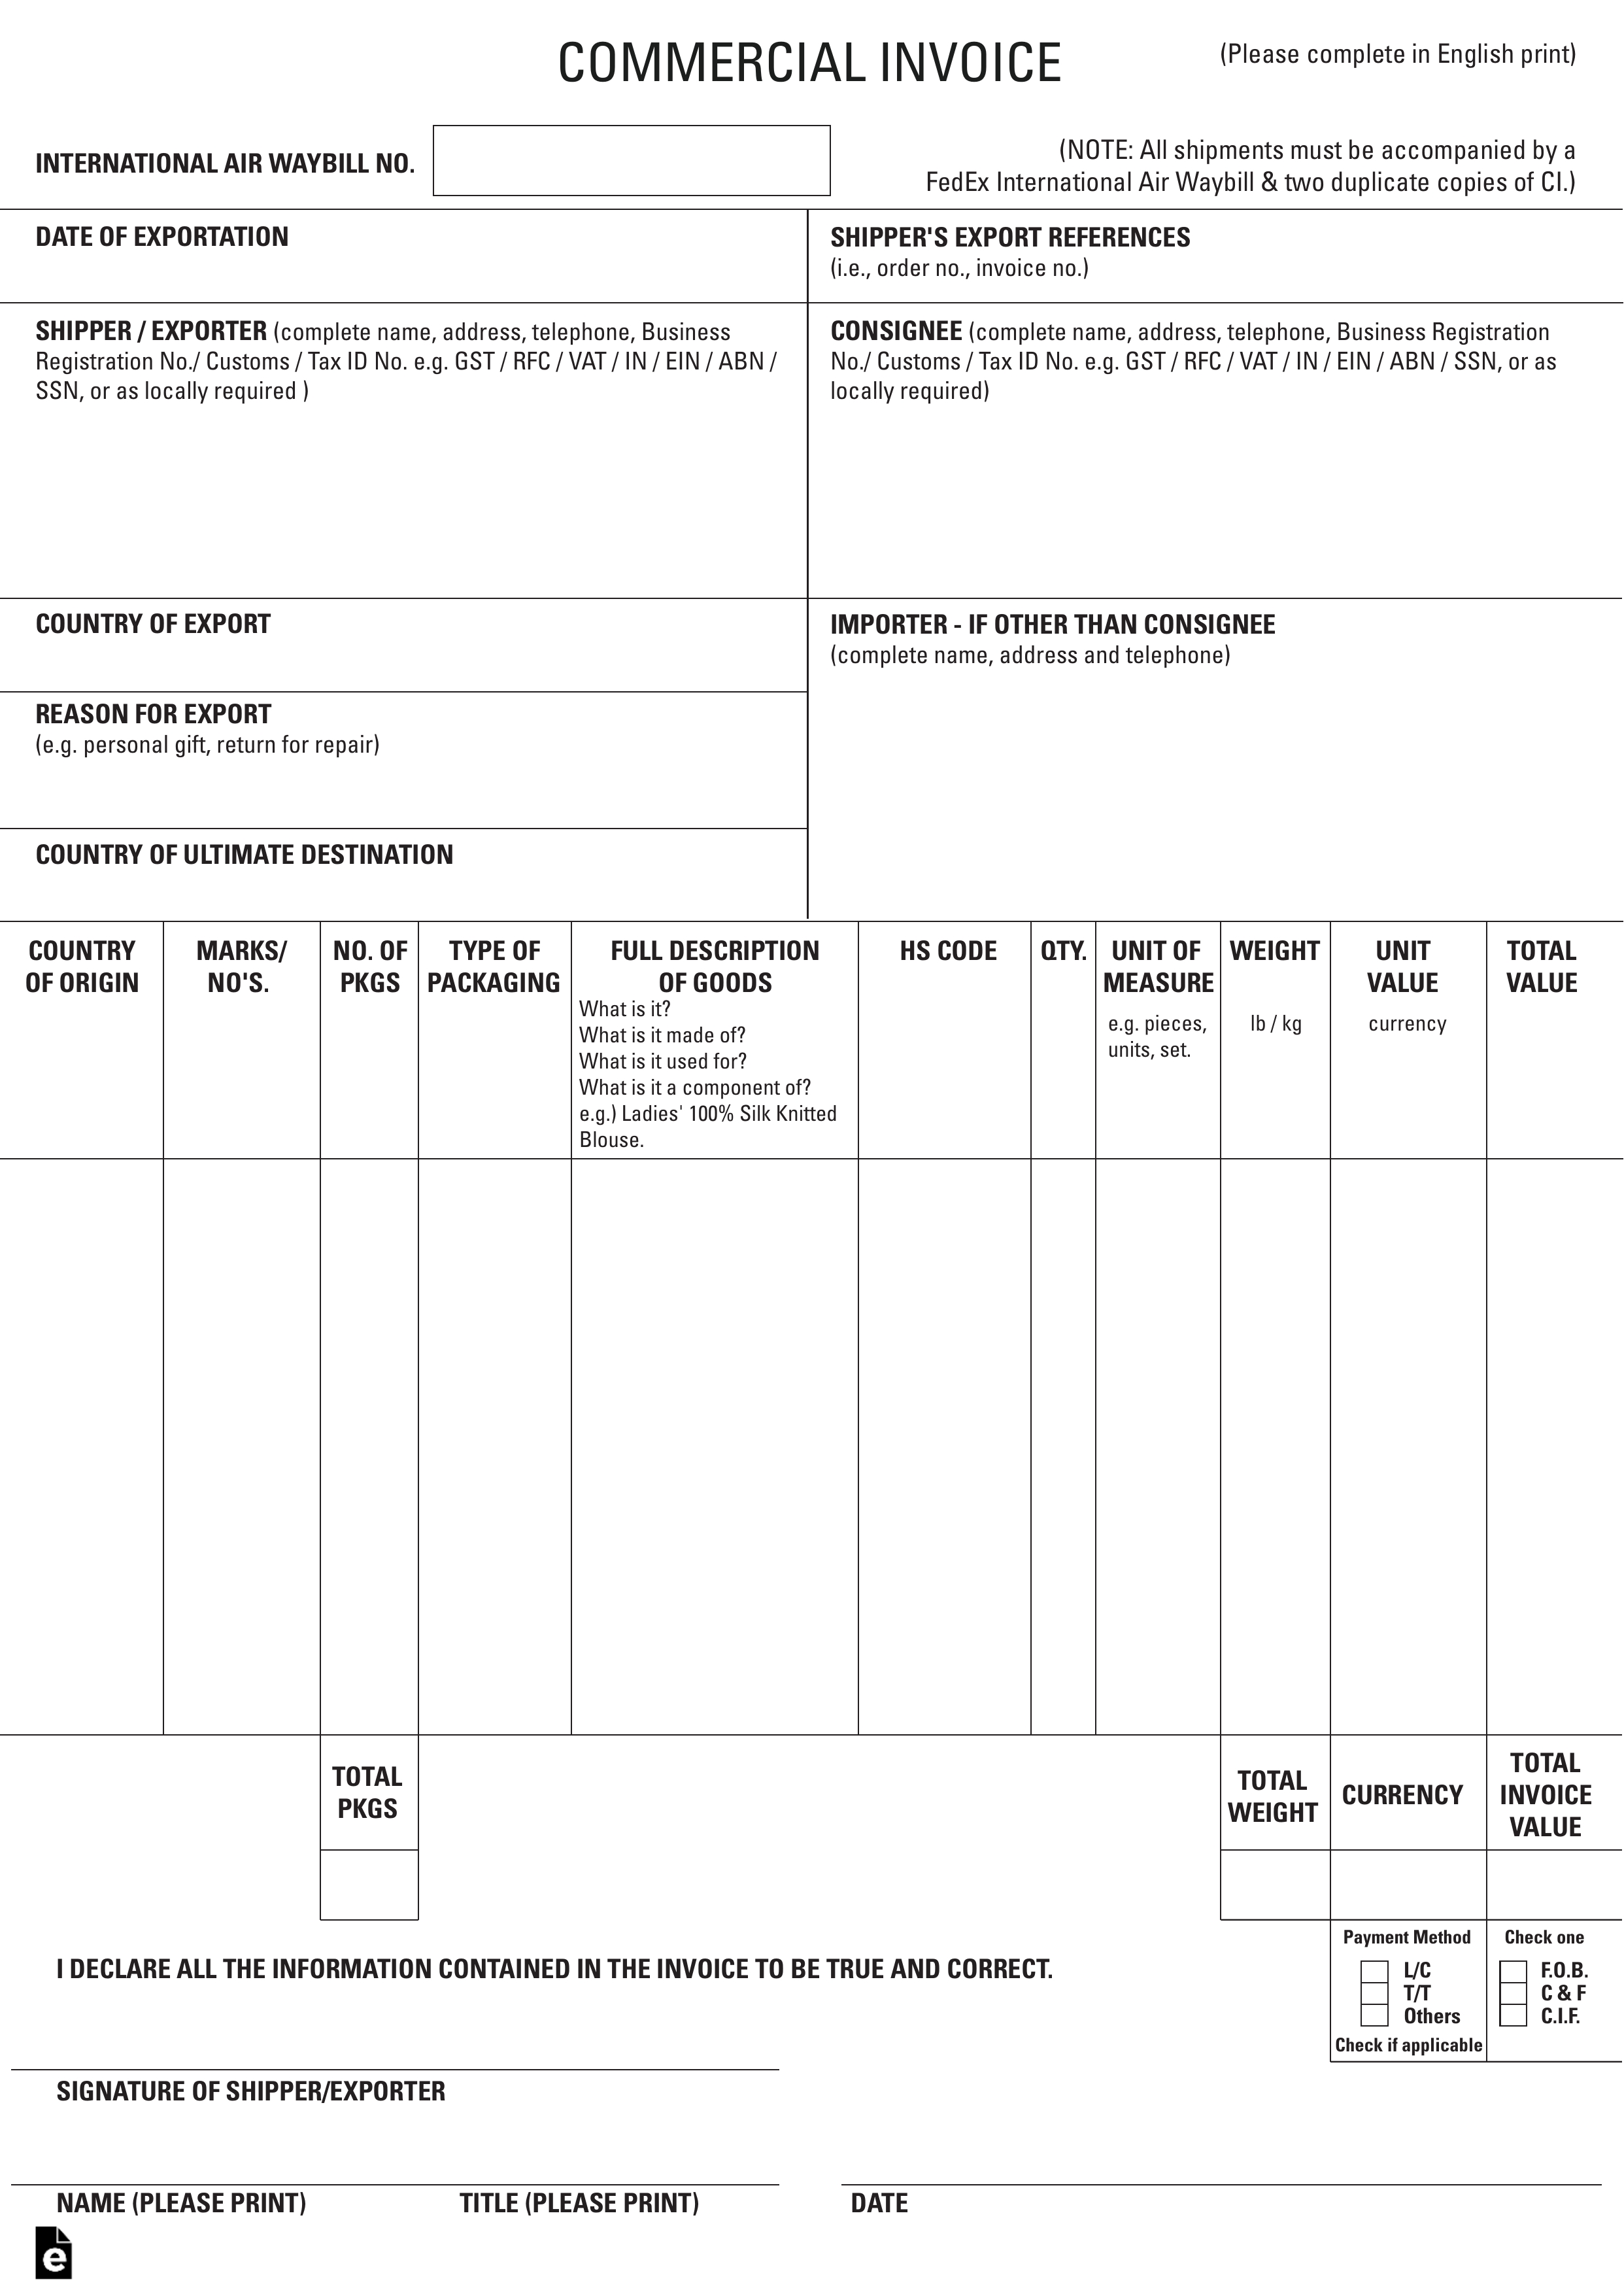 free international commercial invoice templates pdf international commercial invoice for shipping